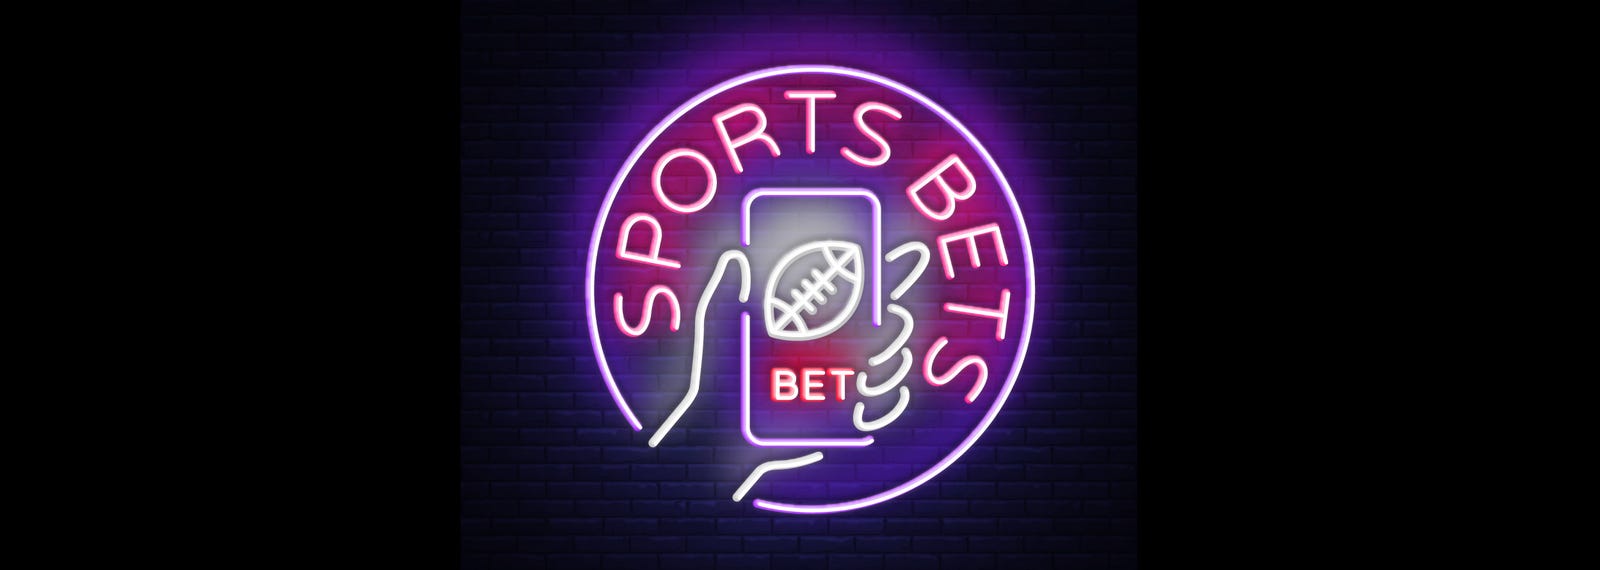 sports bets